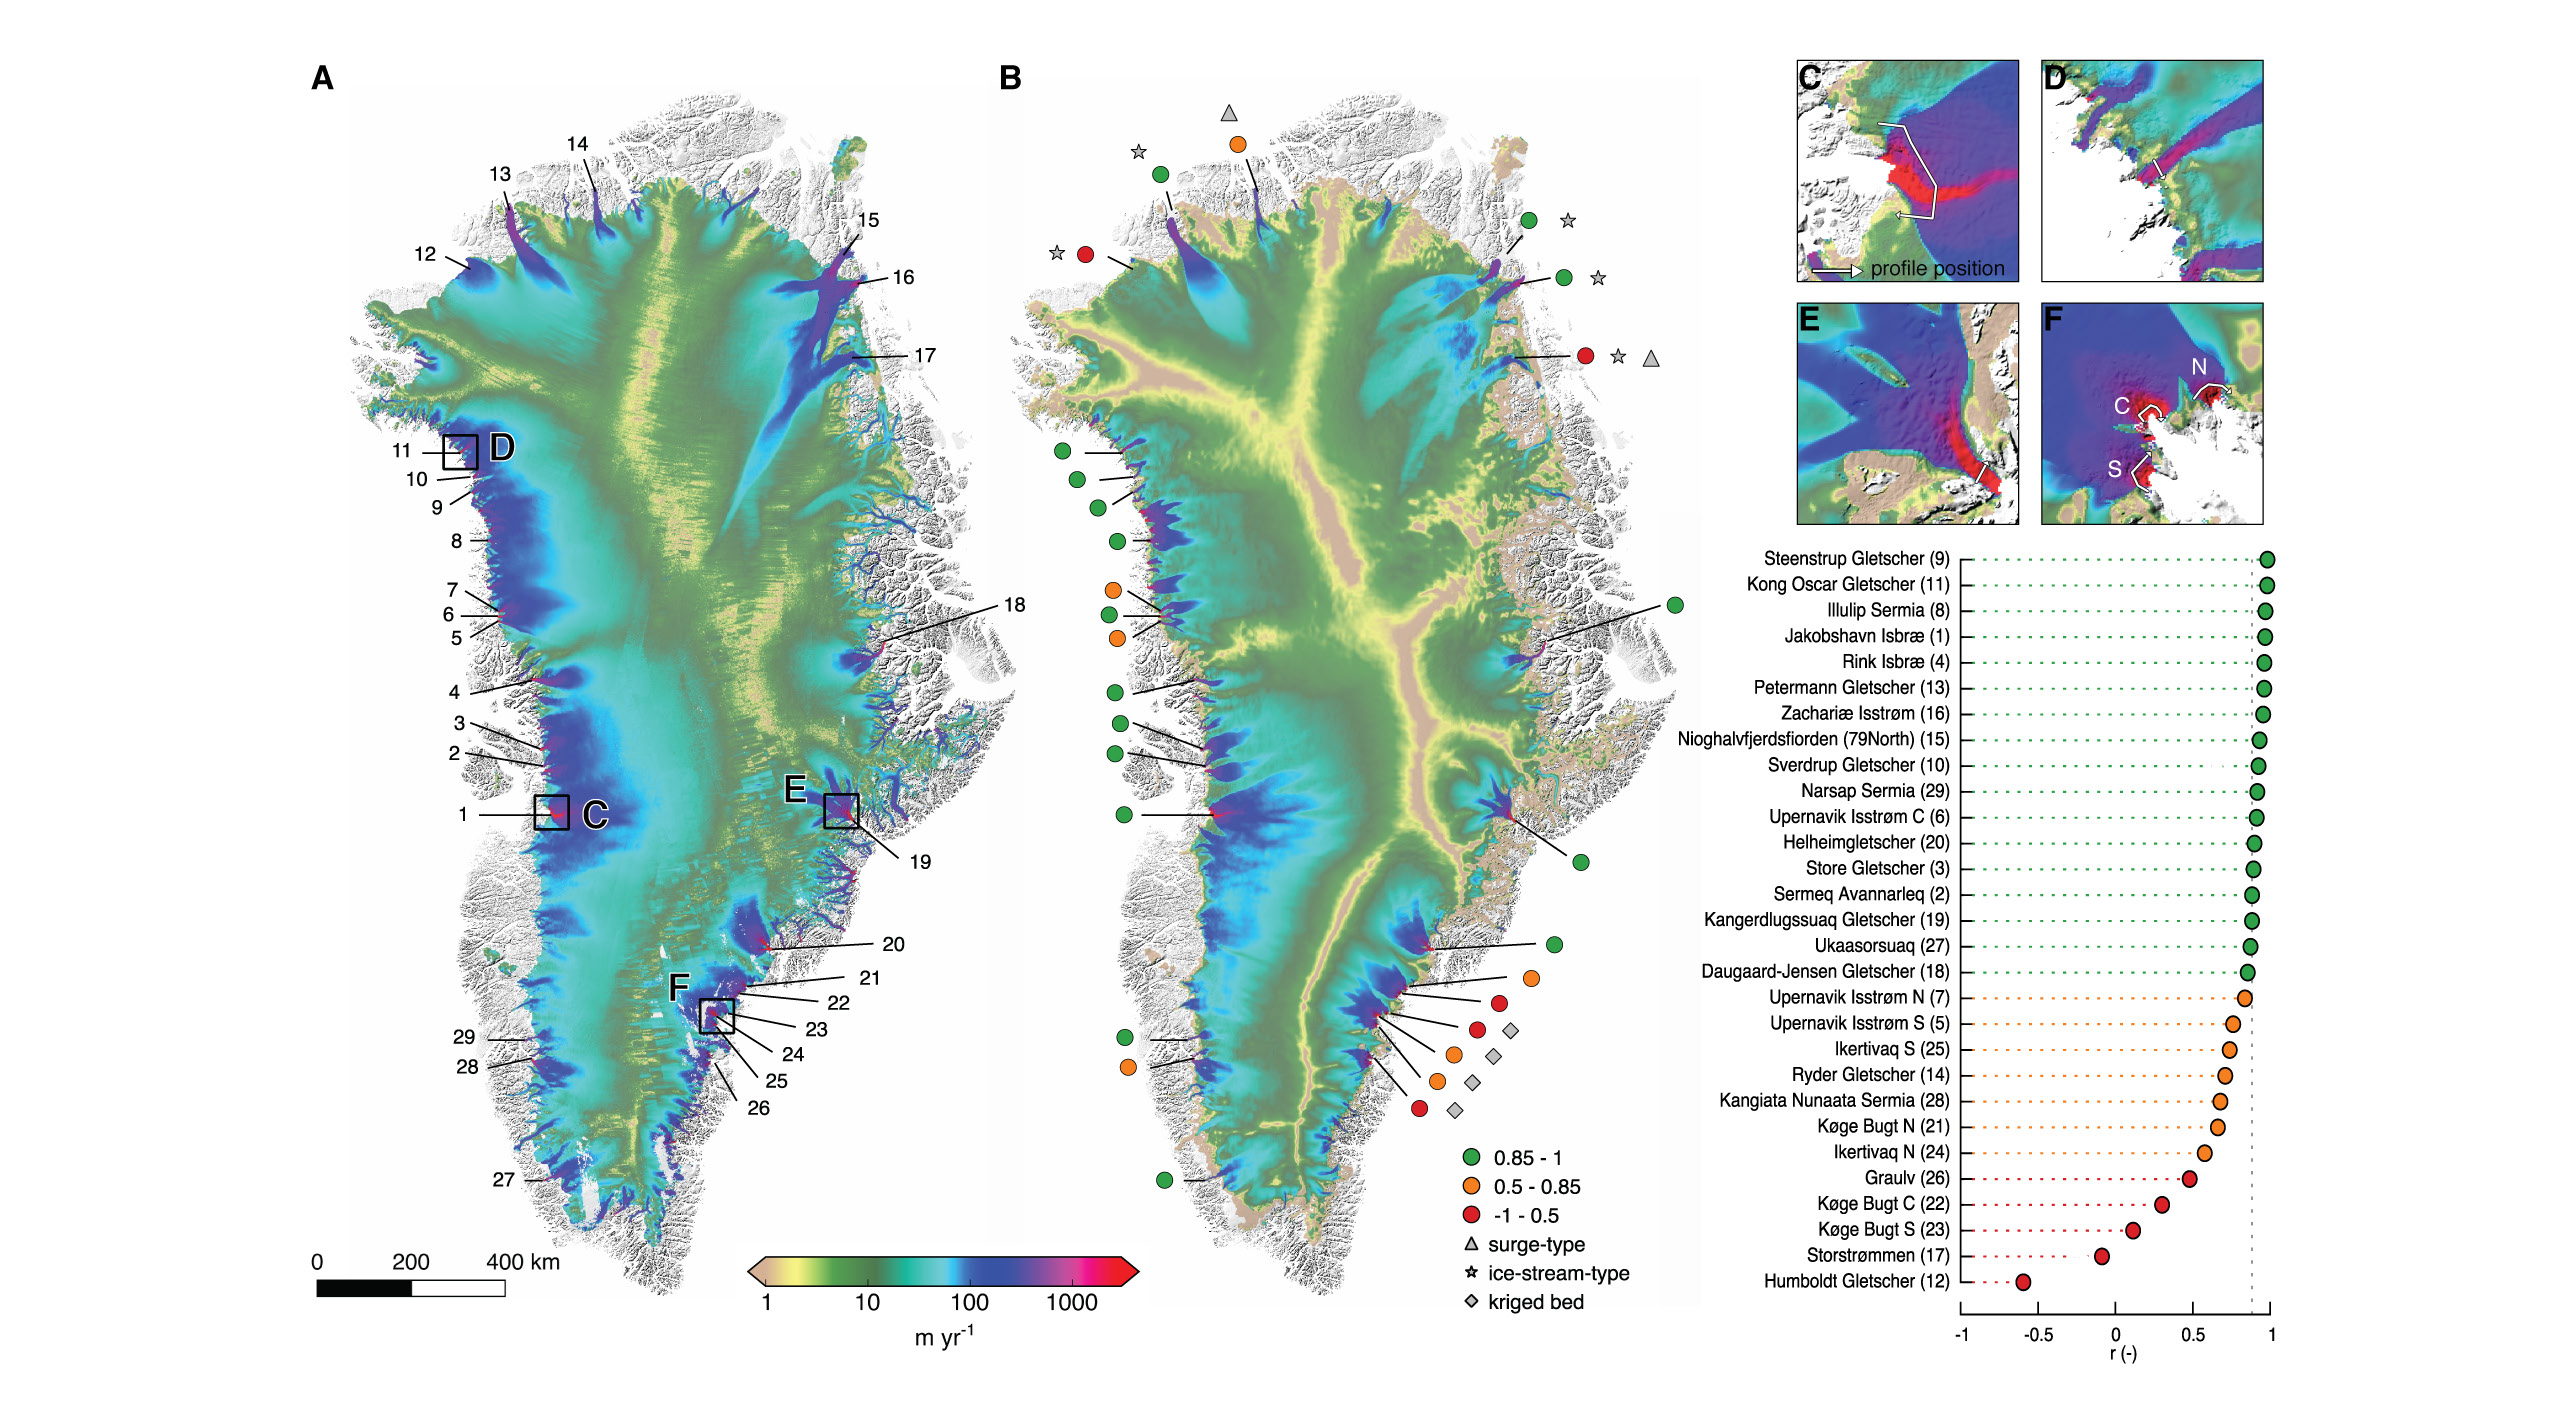 These maps use colors to show actual and modeled surface speeds on Greenland’s ice sheet. The map on the left, A, reflects speeds observed in 2008-09. The map on the right, B, reflects modeled speeds at a grid resolution of 600 meters. The colored dots around the model map and in the list at right indicate the degree of correlation between the observations and the model’s predictions at cross-profiles of 29 outlet glaciers along Greendland’s coast. Green dots represent high correlation, while orange dots represent moderate correlation and red dots represents lesser correlation. The smaller inset maps show simulated surface speeds of Jakobshavn Isbræ (C), Kong Oscar Gletscher (D), Kangerdlugssuaq Gletscher (E), and Køge Bugt (F). White lines on the inset maps indicate the position of the cross-profiles.